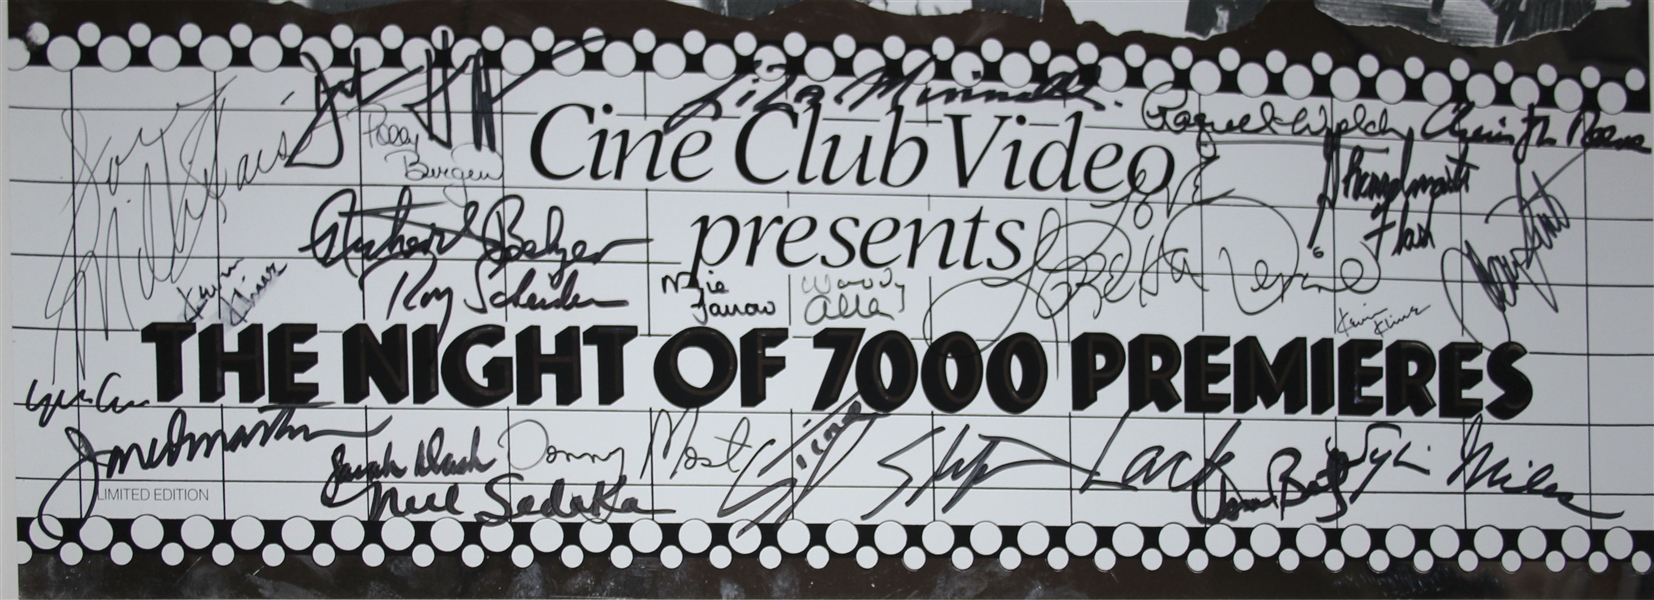 Star Studded Signed Movie Premiere Poster -- Signed by Christopher Reeve, Warren Beatty, Sting, Yoko Ono, Woody Allen, Mia Farrow, Liza Minelli, Dustin Hoffman & More